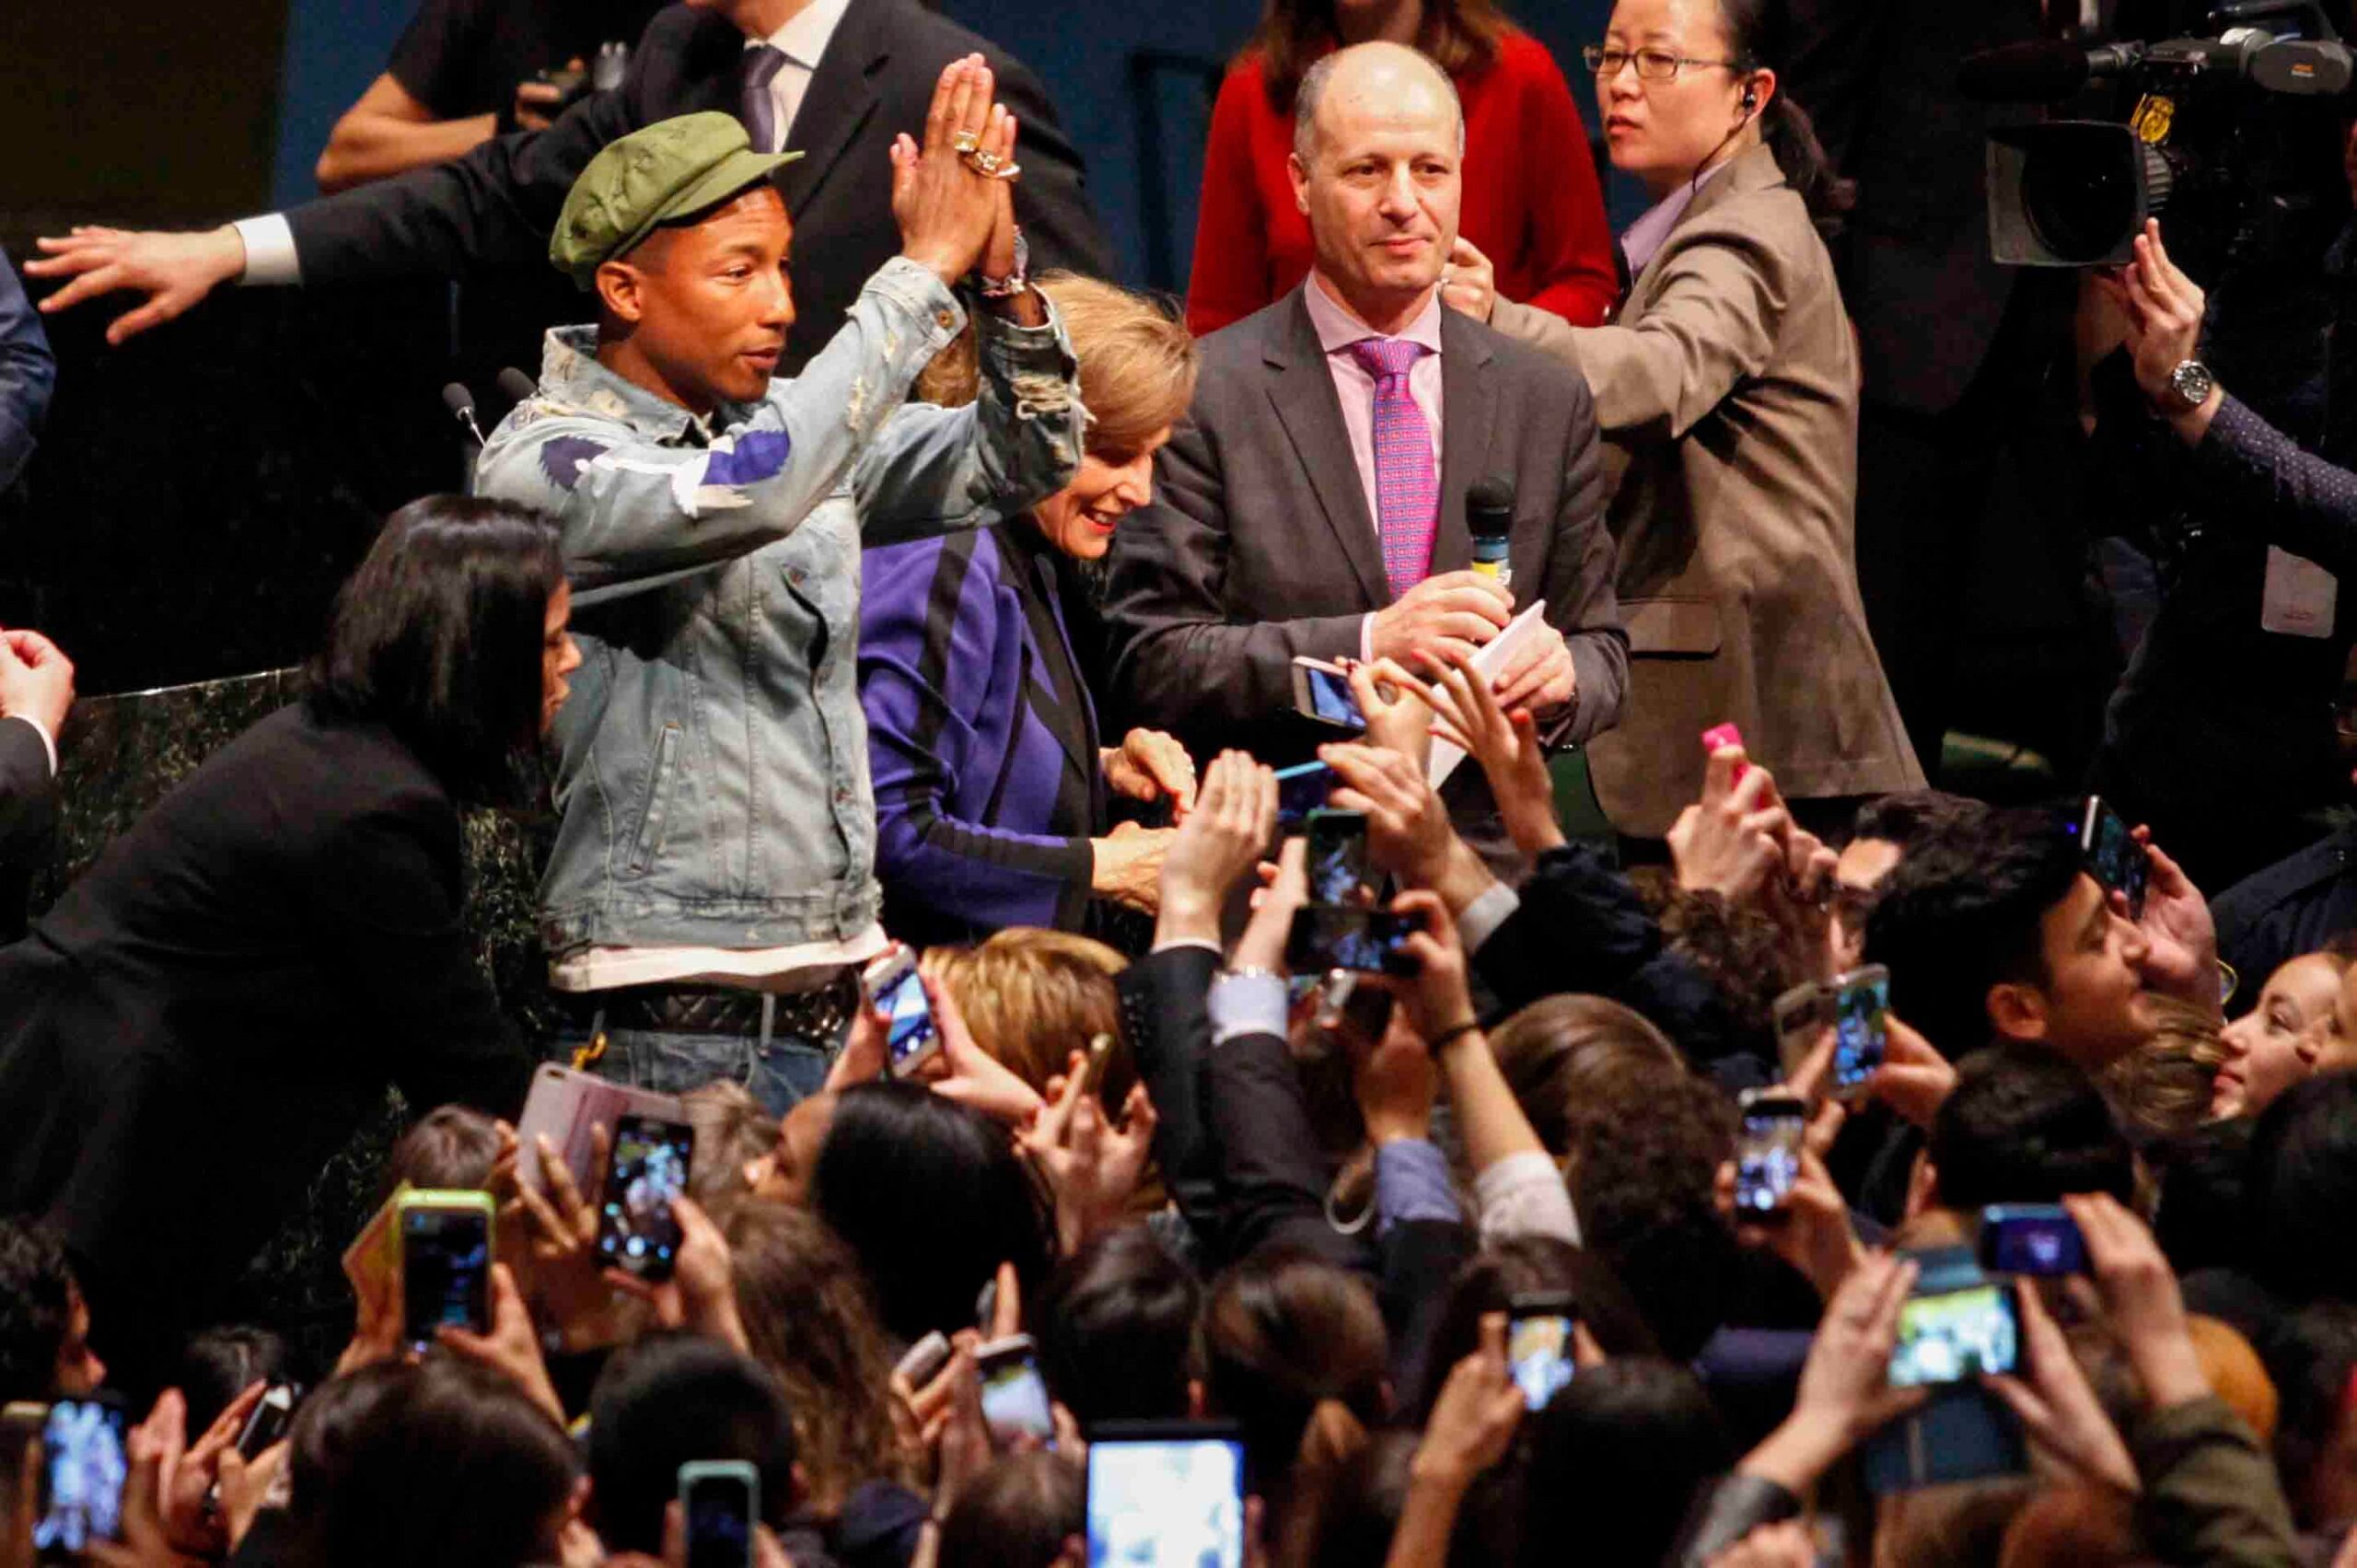 ‘Happy’ Pharrell mobbed at UN General Assembly